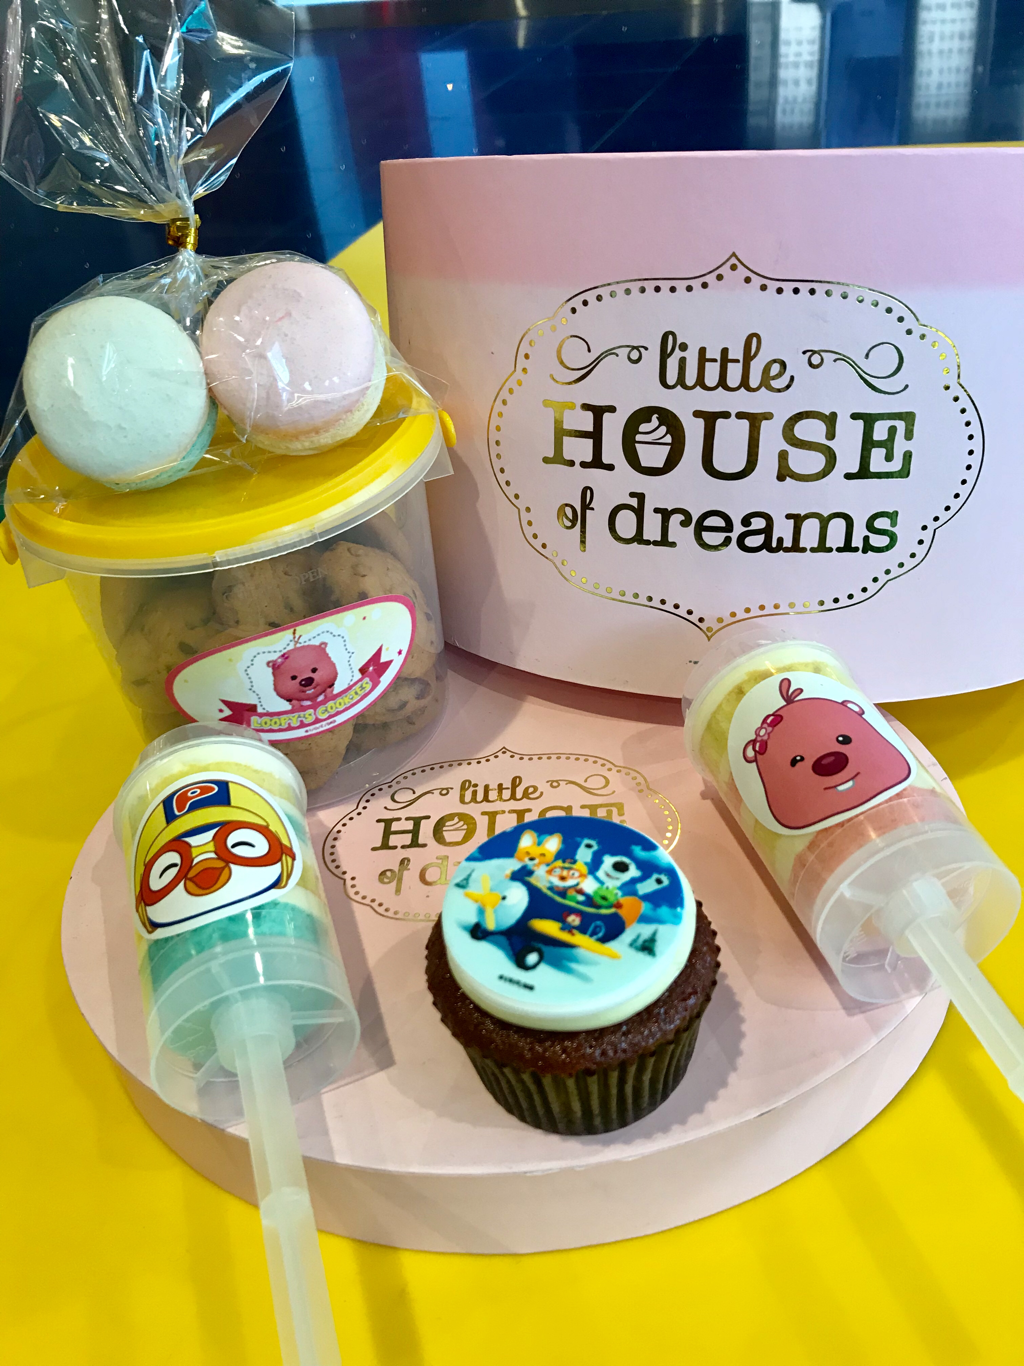 Some of the selections of the yummy and pretty Pororo-themed desserts made by Little House of Dreams (@littlehouseofdreams on Instagram) 